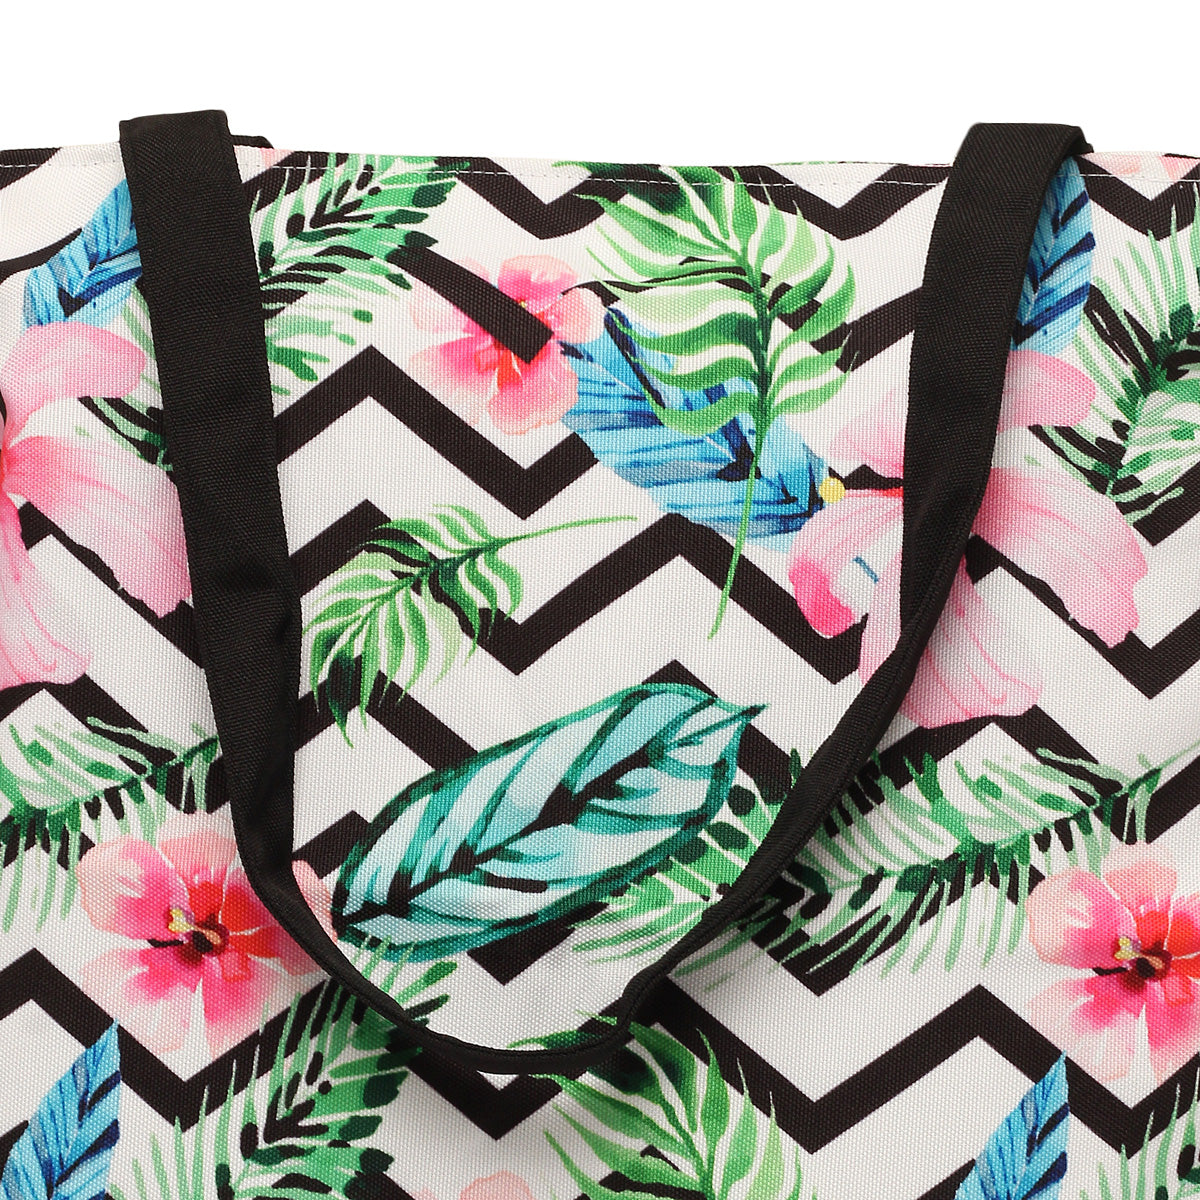 Tote bag adorned with colorful tropical print and black handles.